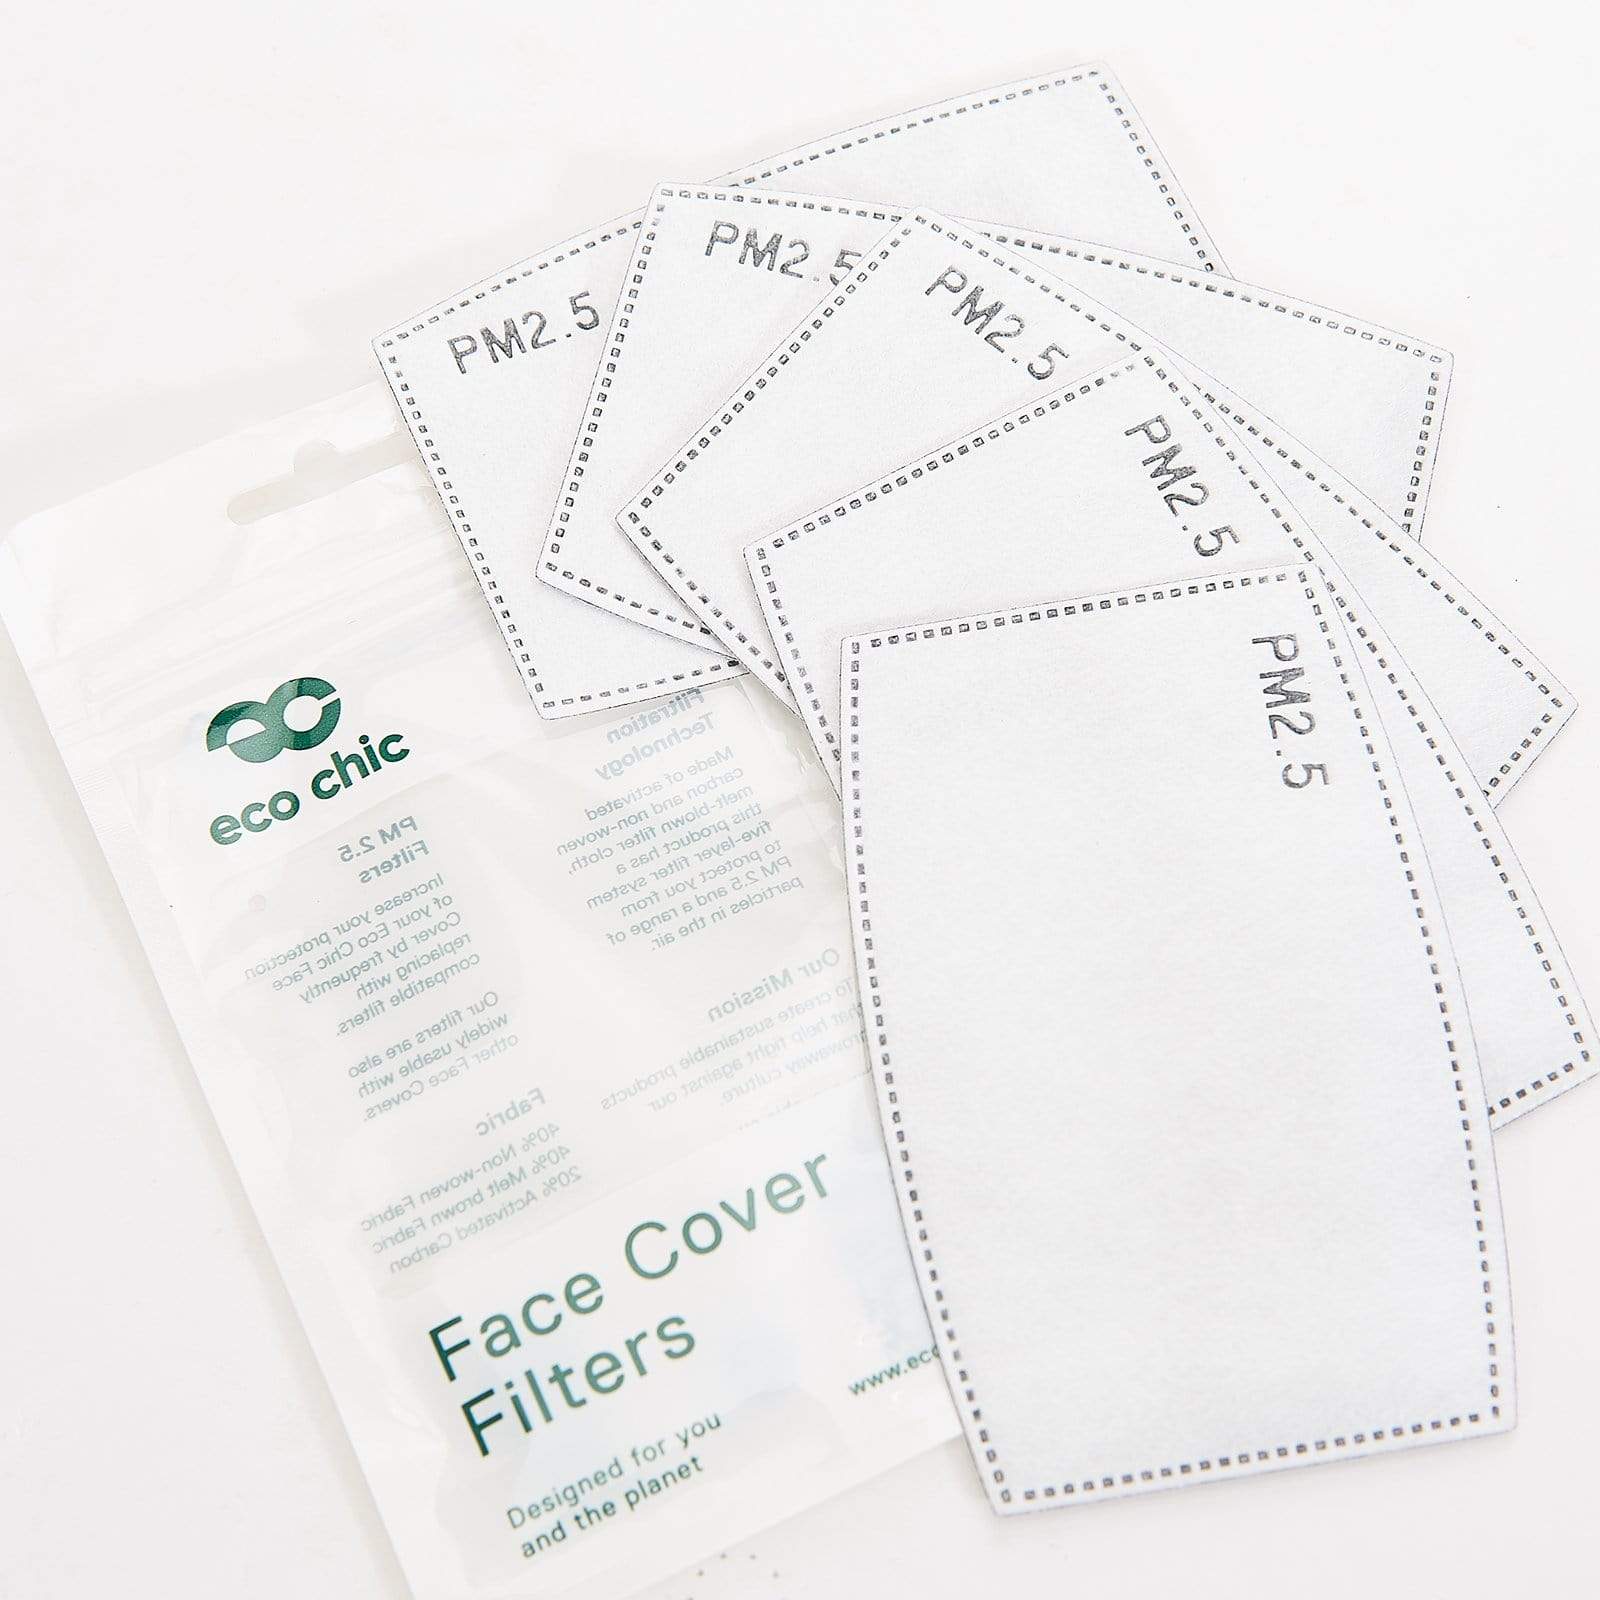 Eco Chic Eco Chic Face Cover 5 Filters Set